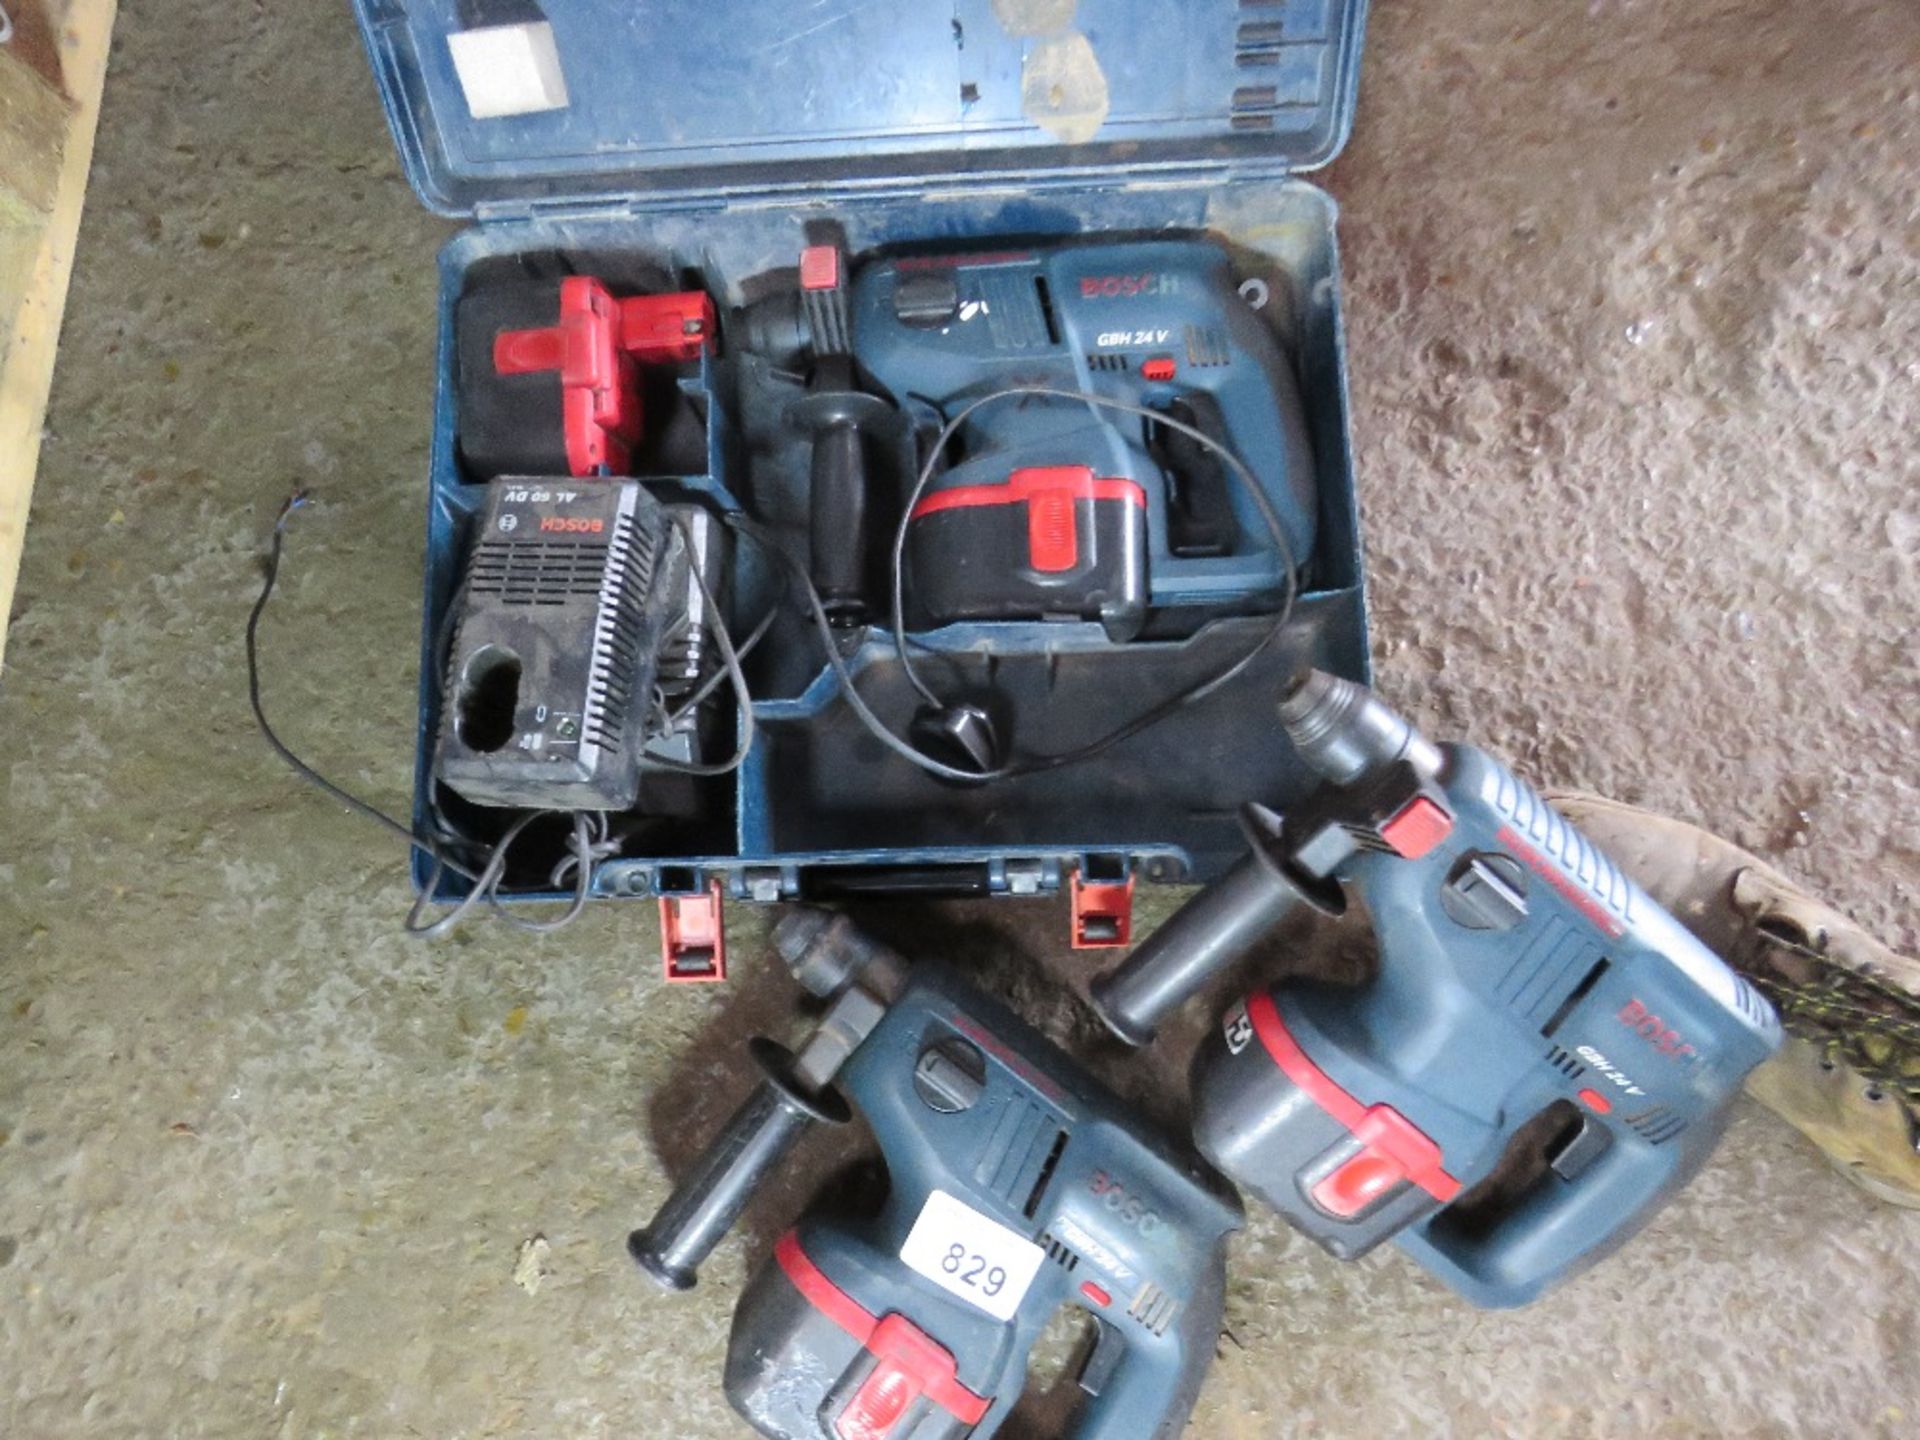 3 X BOSCH 24VOLT DRILLS. BEEN IN LONG TERM STORAGE, UNTESTED, CONDITION UNKNOWN. - Image 2 of 2